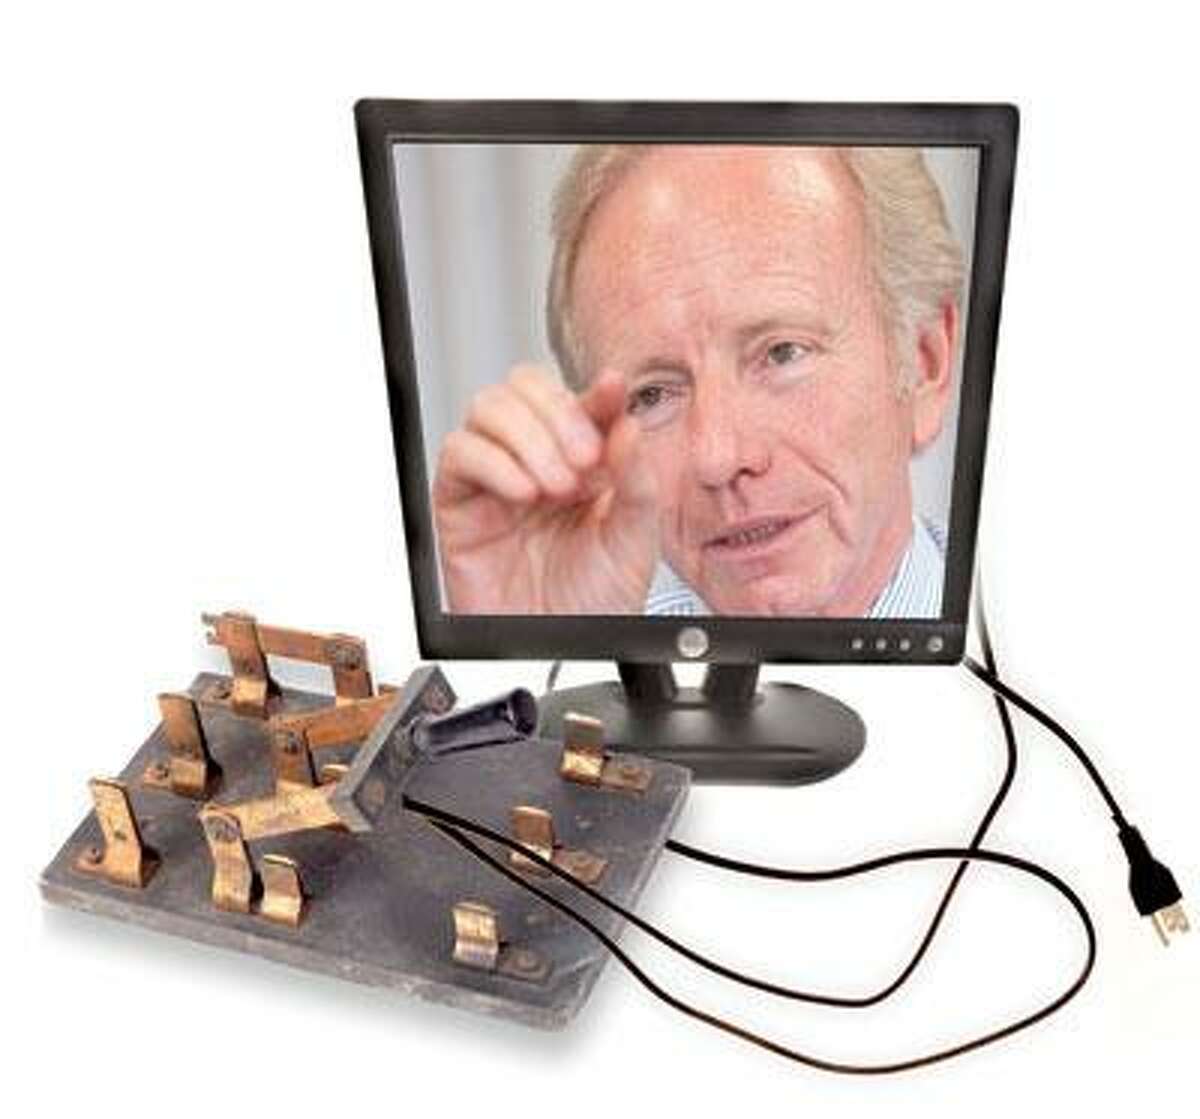 Connecticut Sen. Joe Lieberman's bill opening the door for the president of the United States to have a "kill switch" that would allow him or her to "shut off the Internet" is being criticized by advocates of free speech and the open web. (New Haven Register graphic)